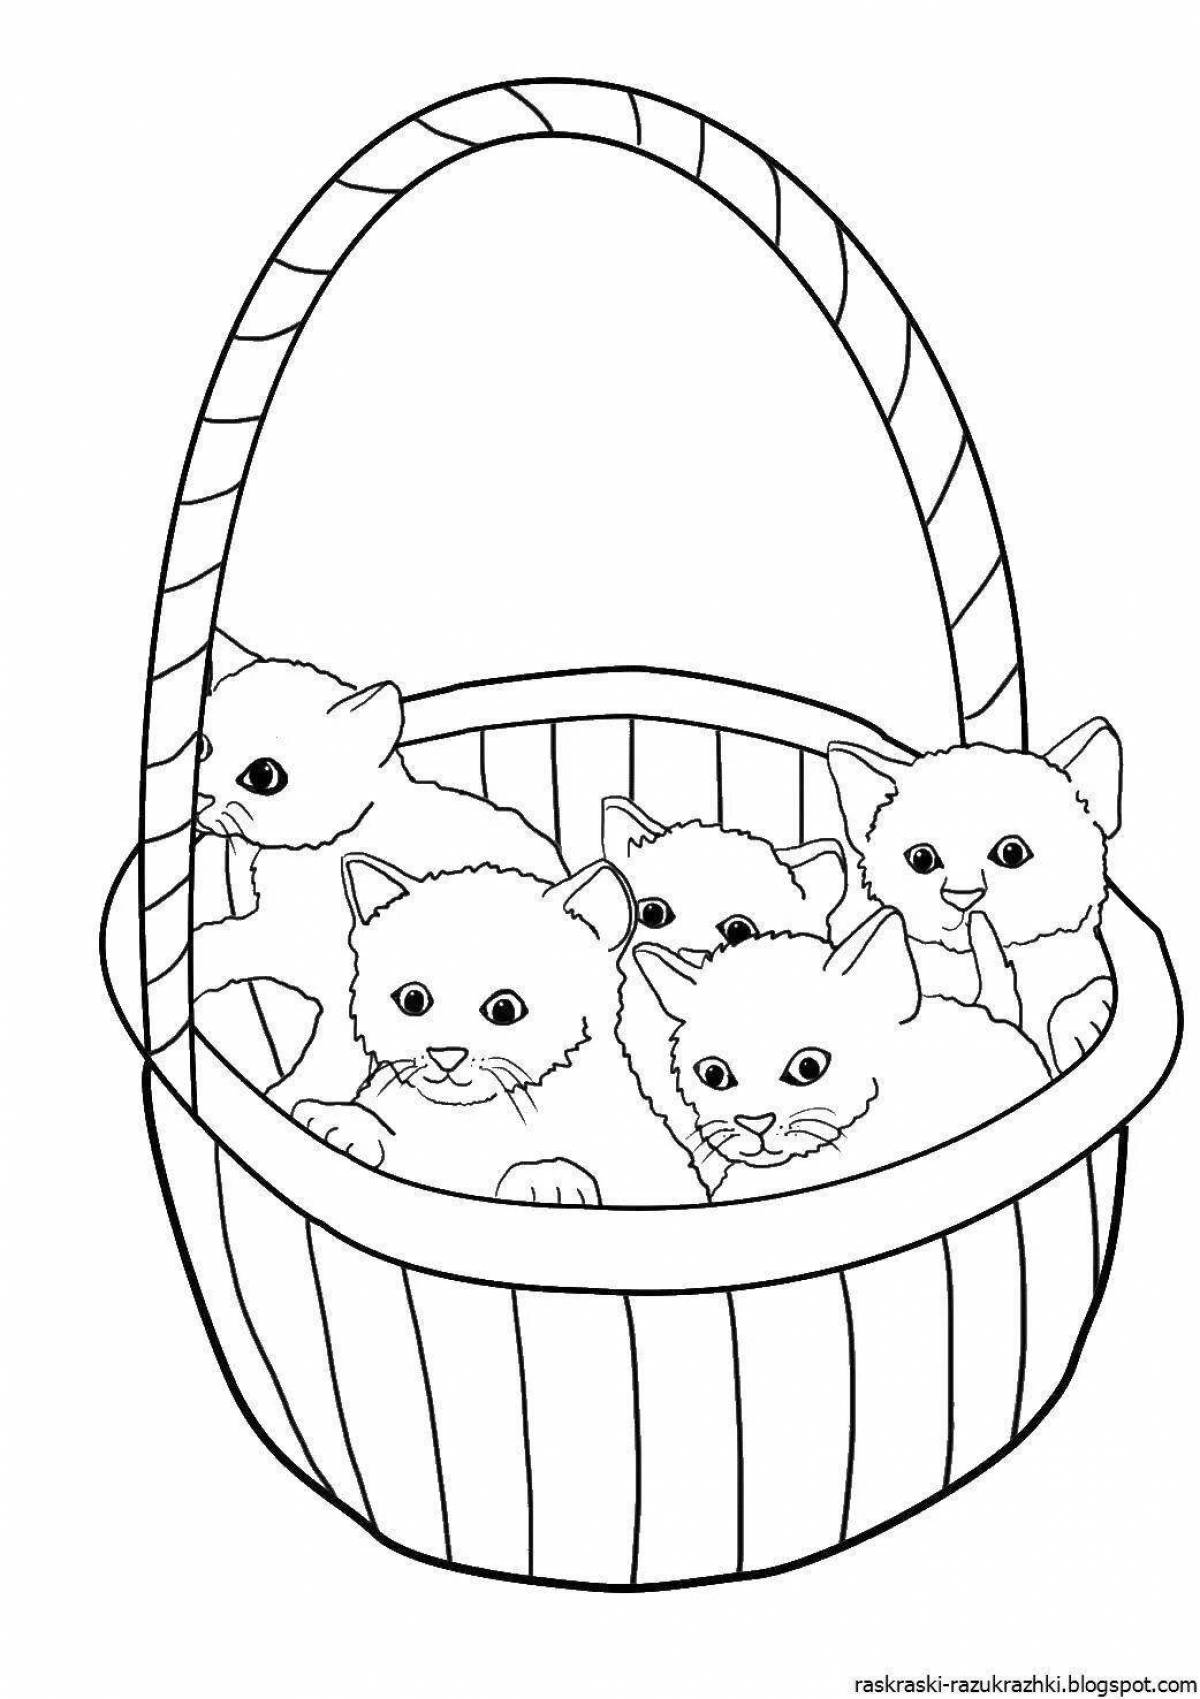 Adorable kittens in a basket